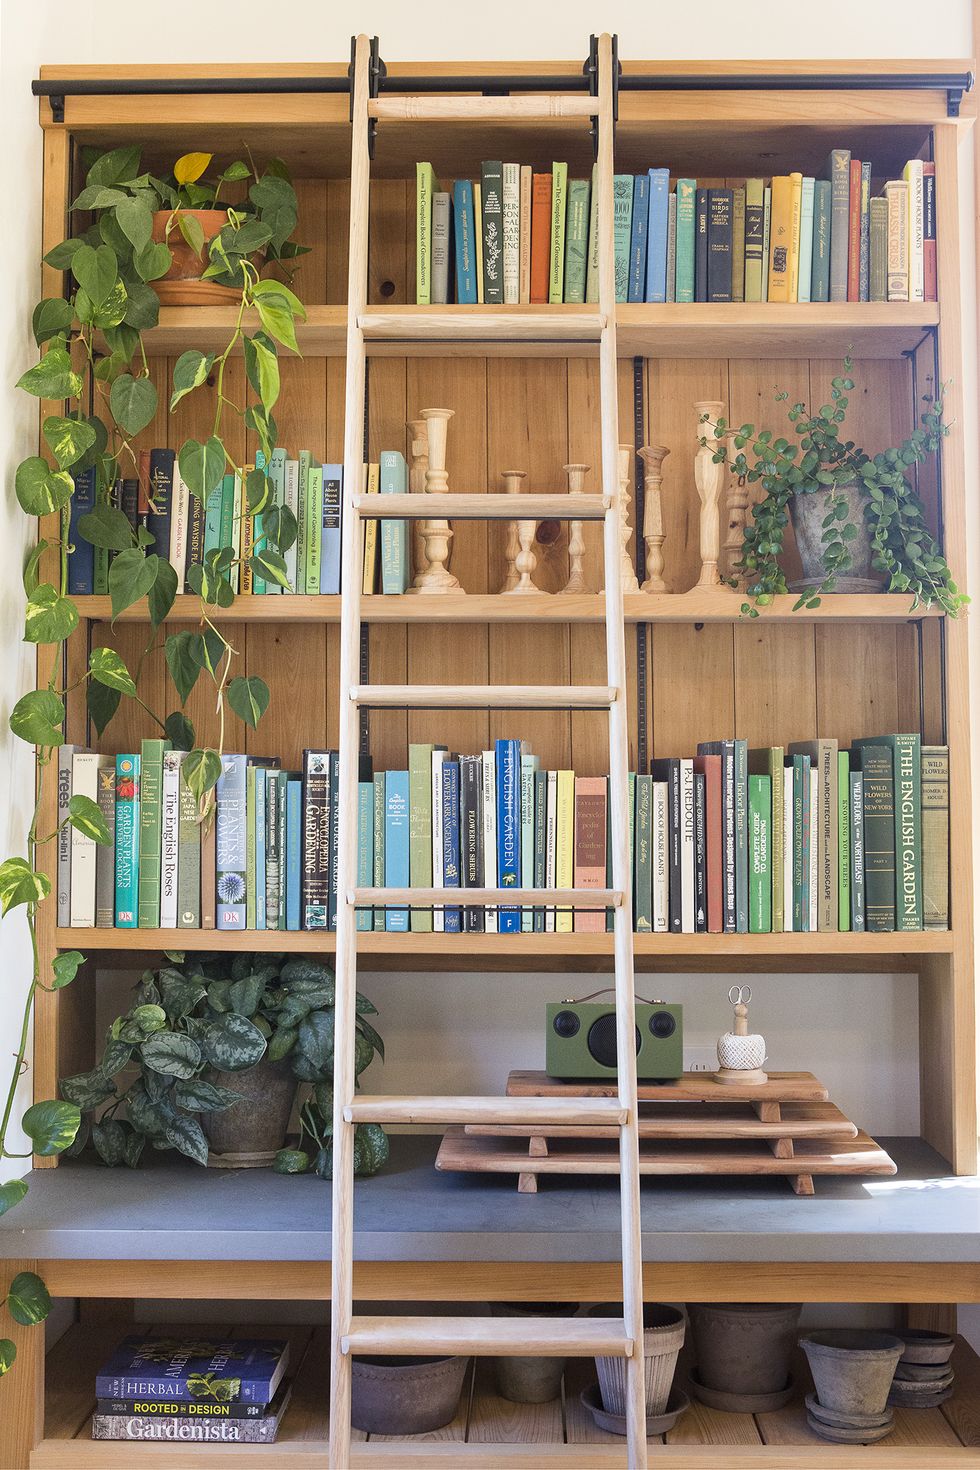 joanna gaines garden shed library